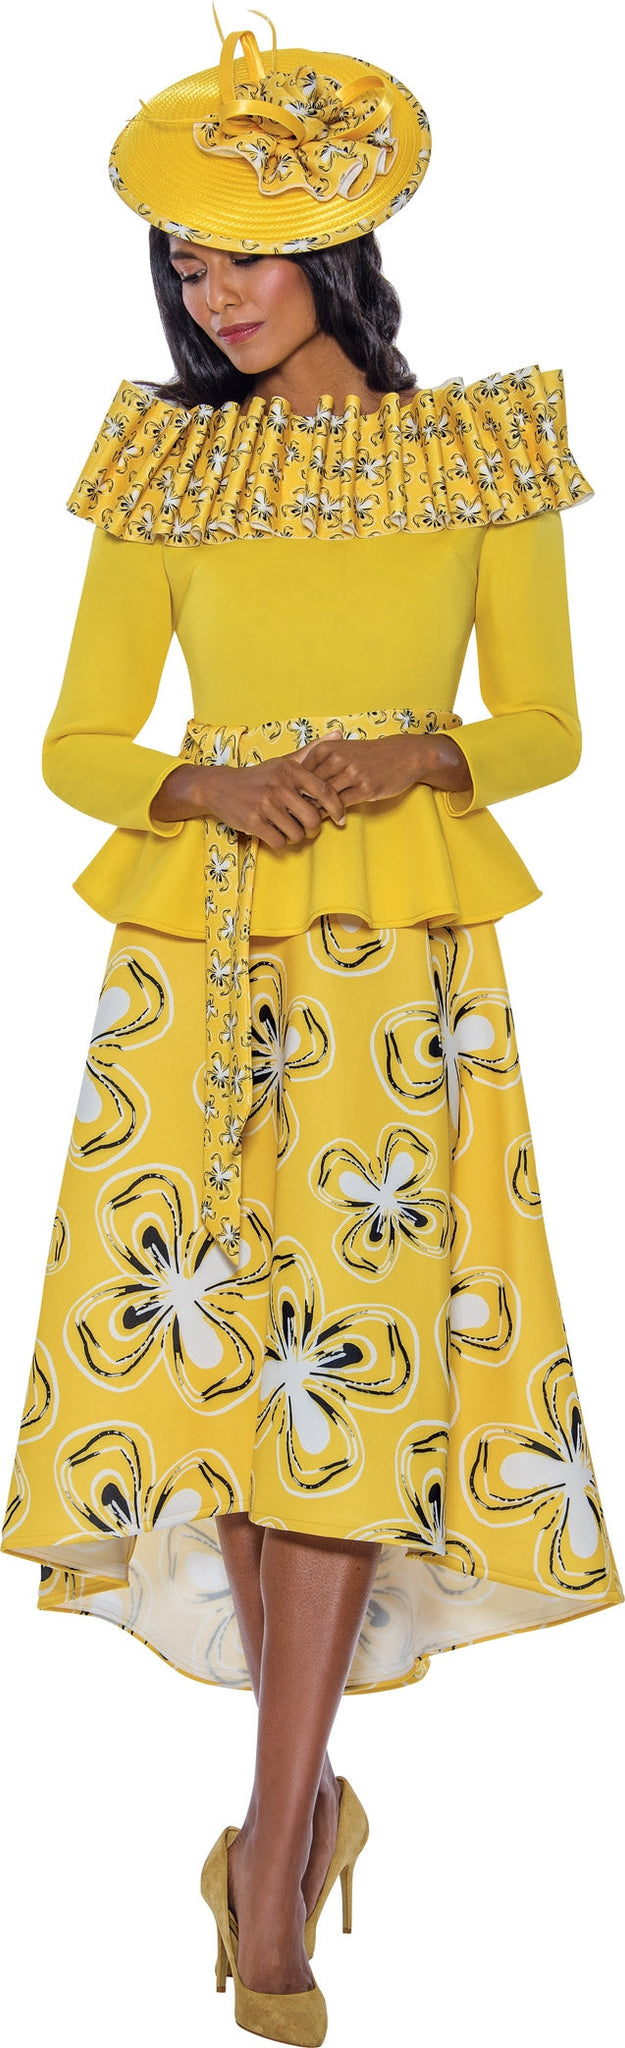 Stellar Looks Skirt Suit 1502C-Yellow - Church Suits For Less